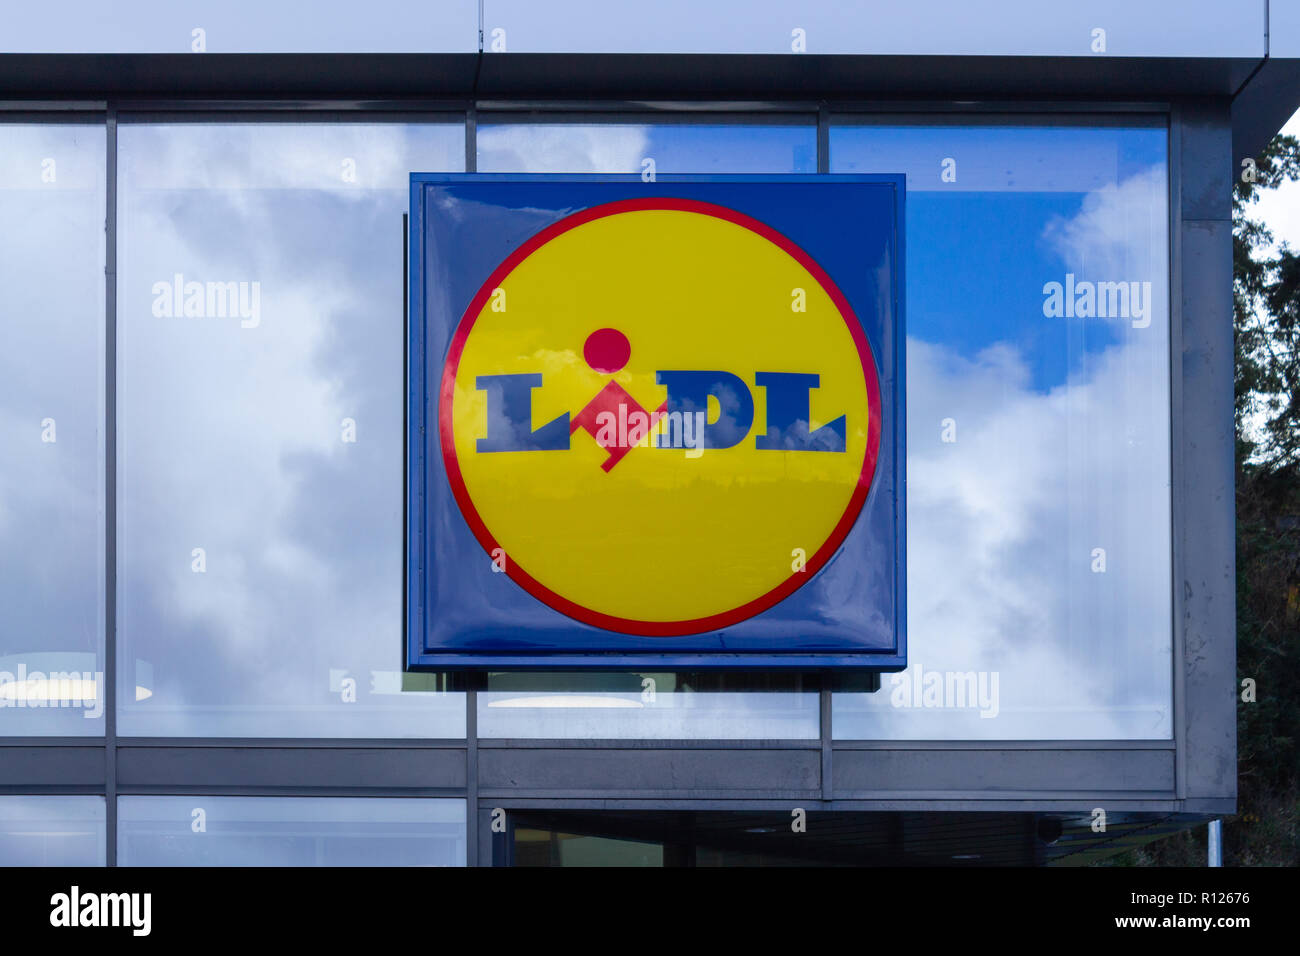 lidl logo on a lidl store front bantry west cork ireland Stock Photo